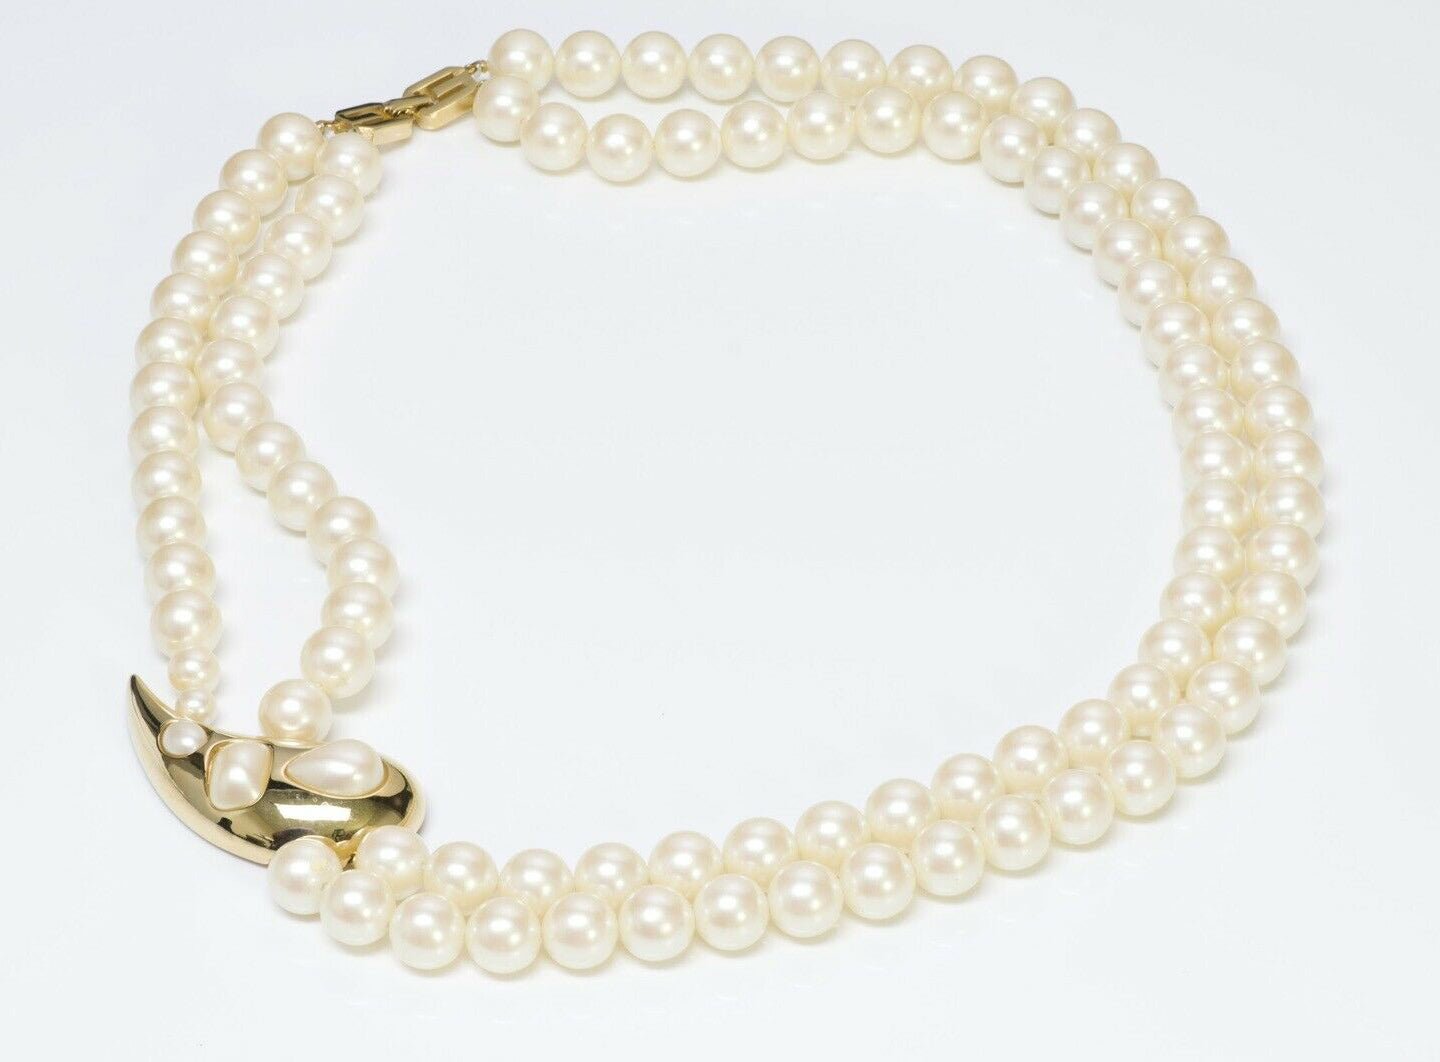 Givenchy 1977 Multi Strand Pearl Necklace